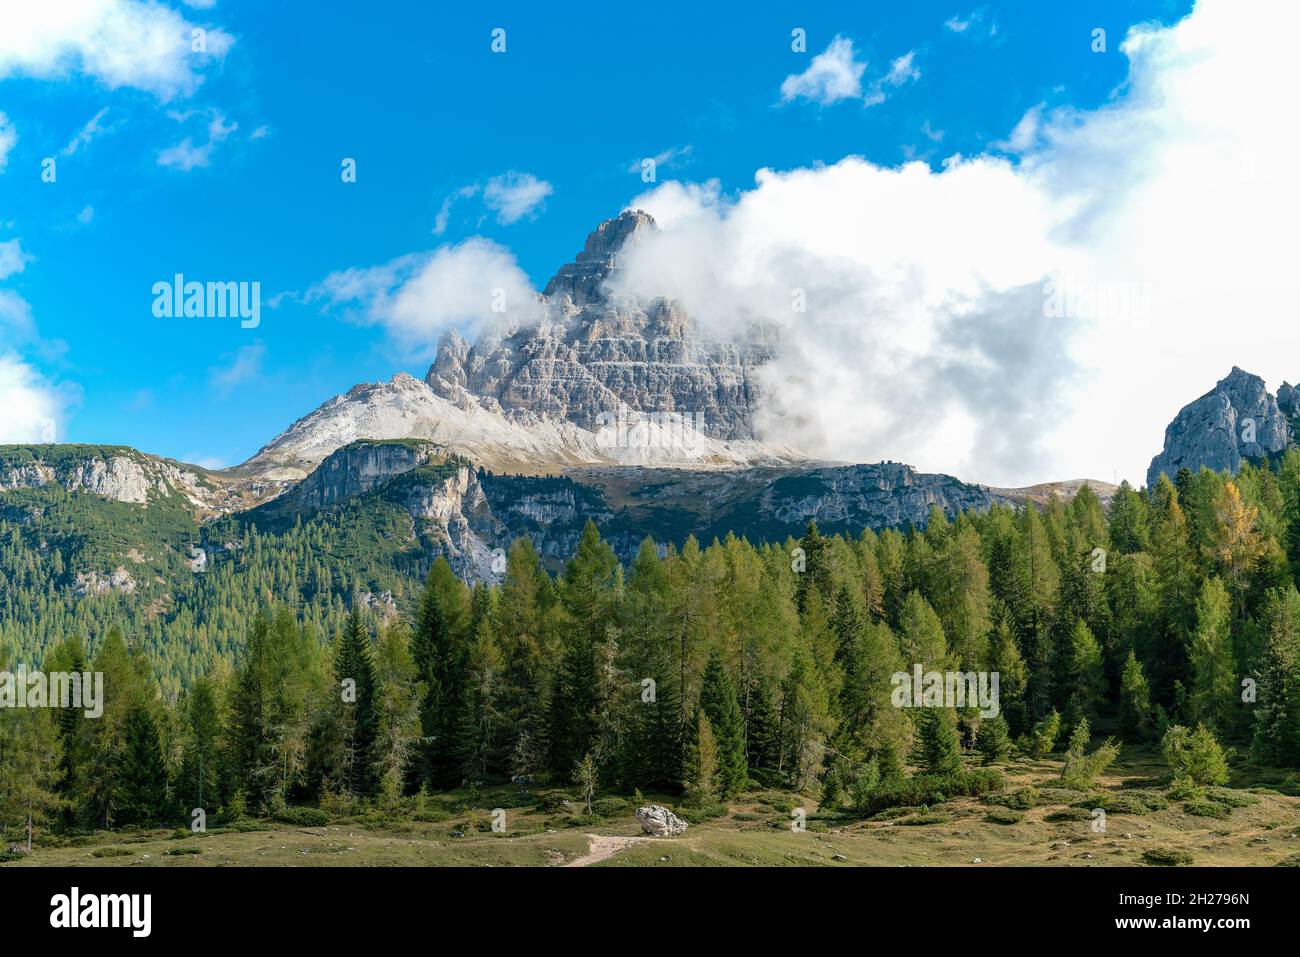 Idyllic landscape at hiking path underneath the famous three peaks mountains in the italian dolomite alps Stock Photo